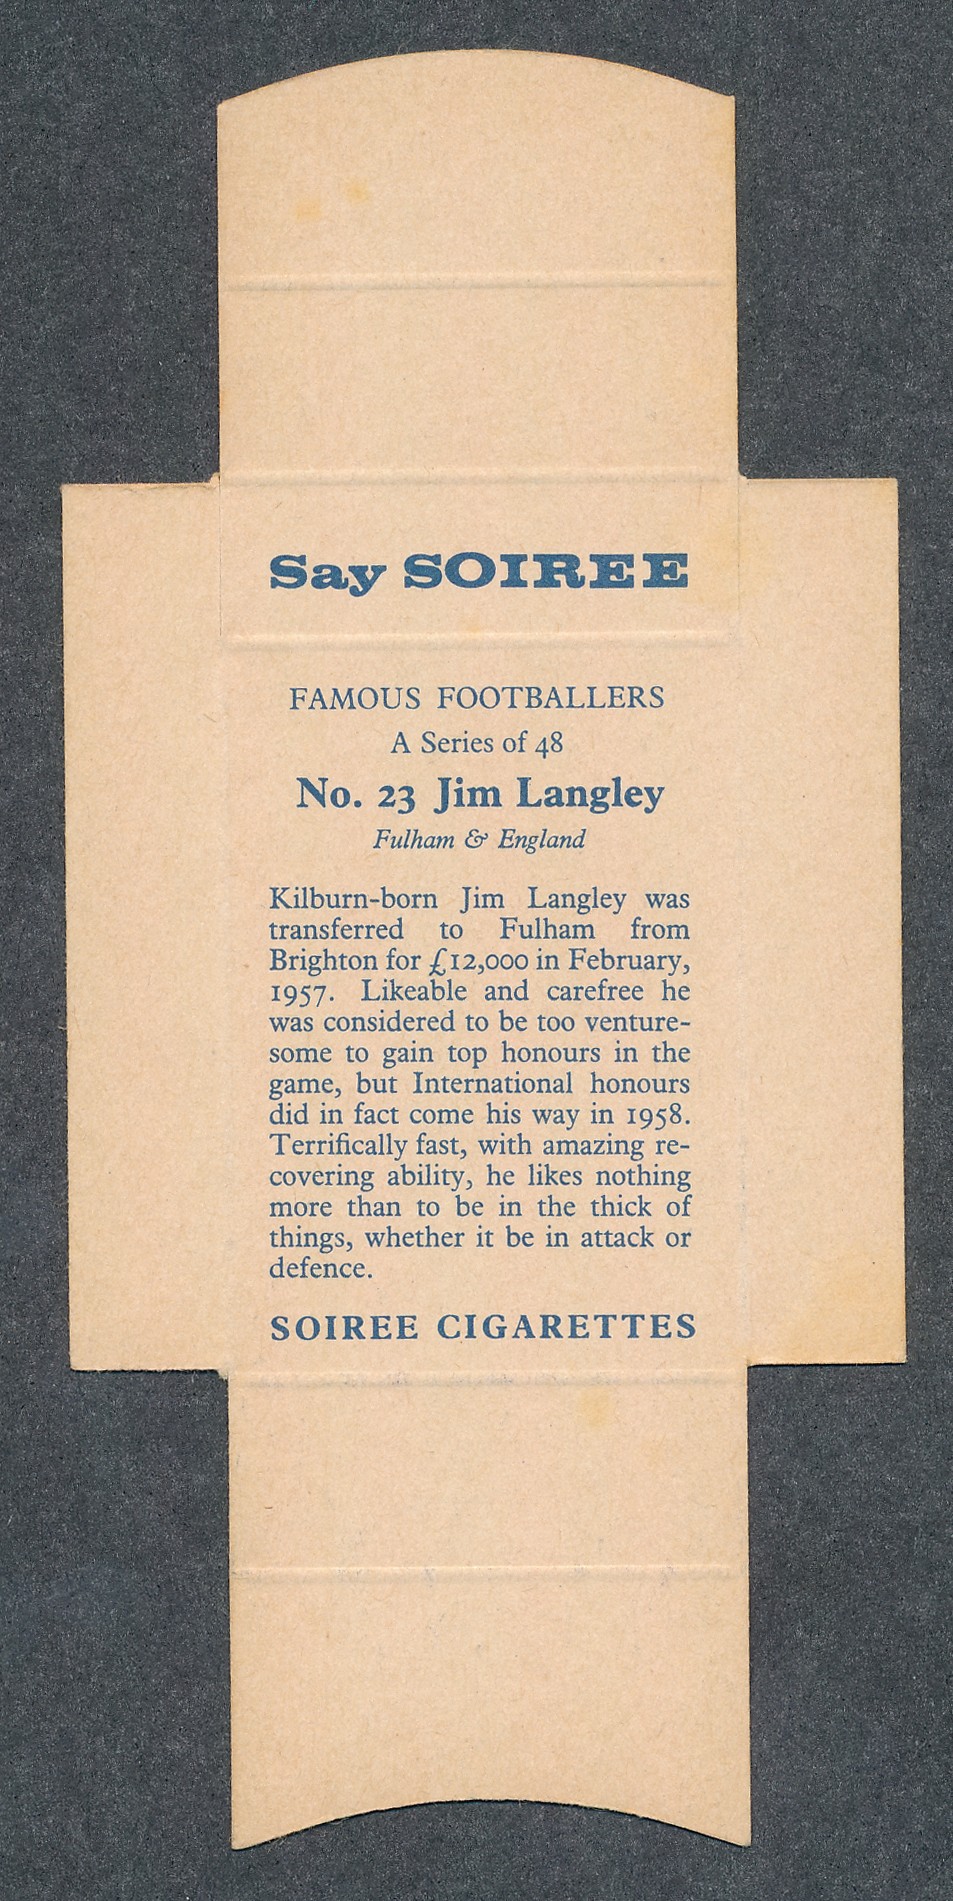 Soiree Cigarettes, Mauritius, Famous Footballers uncut packet issue, No.23 Jim Langley, Fulham & - Image 2 of 2